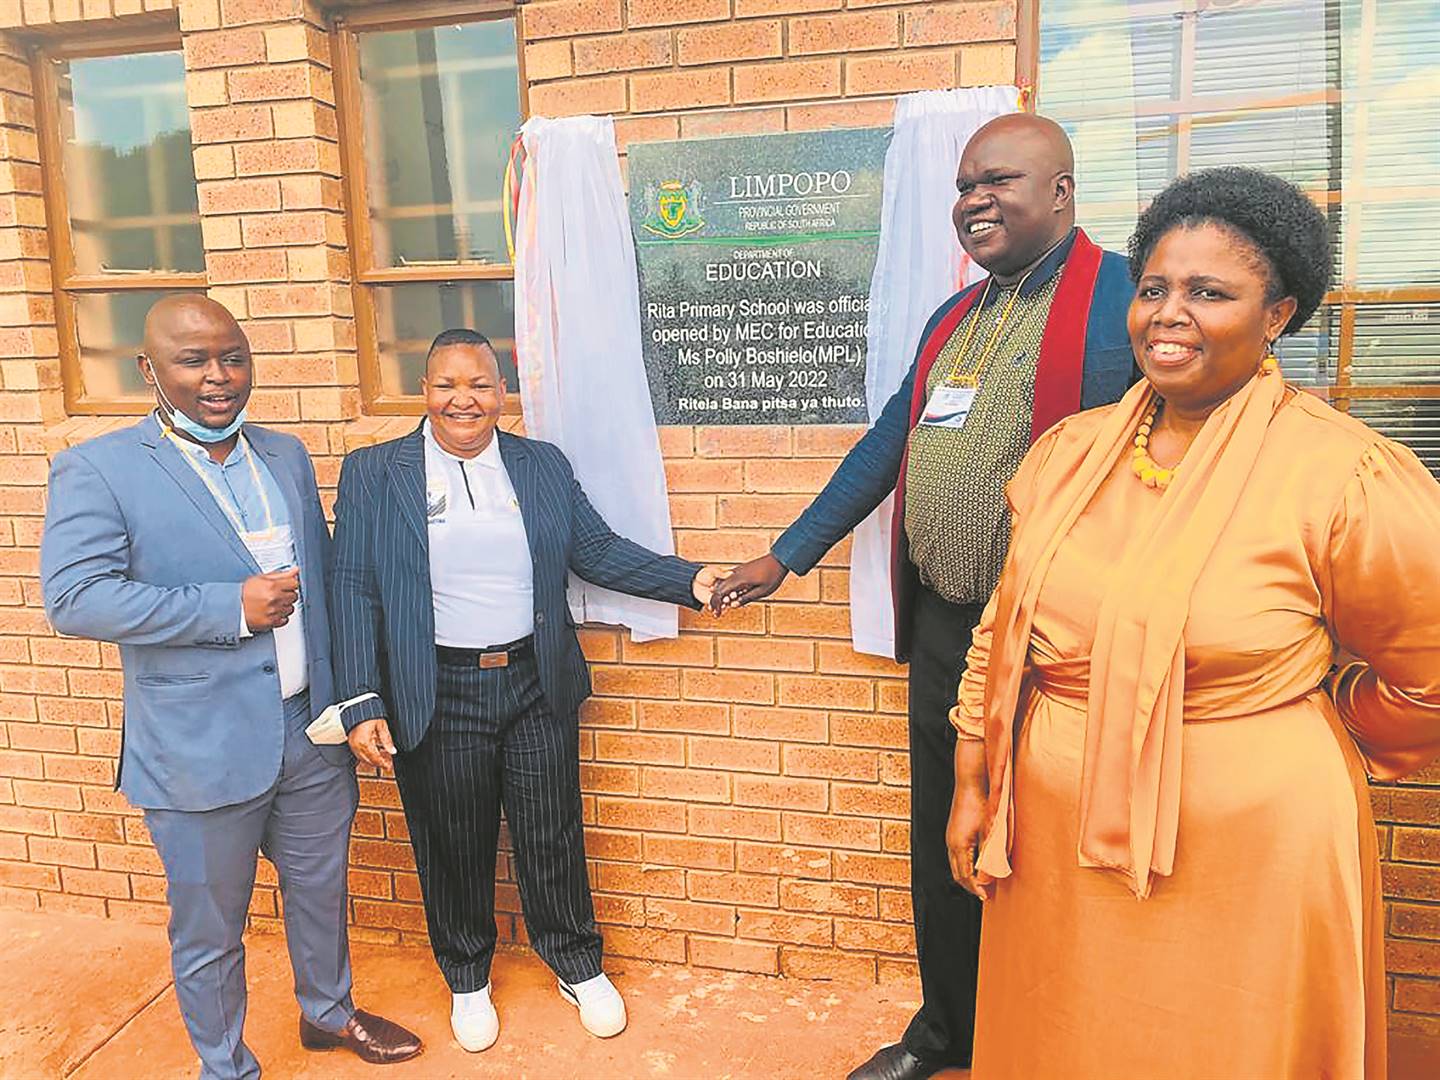 Councillor Mashale Mawasha, MEC Polly Boshielo, Councillor Thabiso Lepulane and (second from left) school. She is joined councilors Mashale Mawasha (left) Thabiso Lepulane (third from left) andMopani West District director Phillipine Modika during the official handover of the renovated and newly constructed Rita Primary School in Rita Village, outside Tzaneen, last week. 